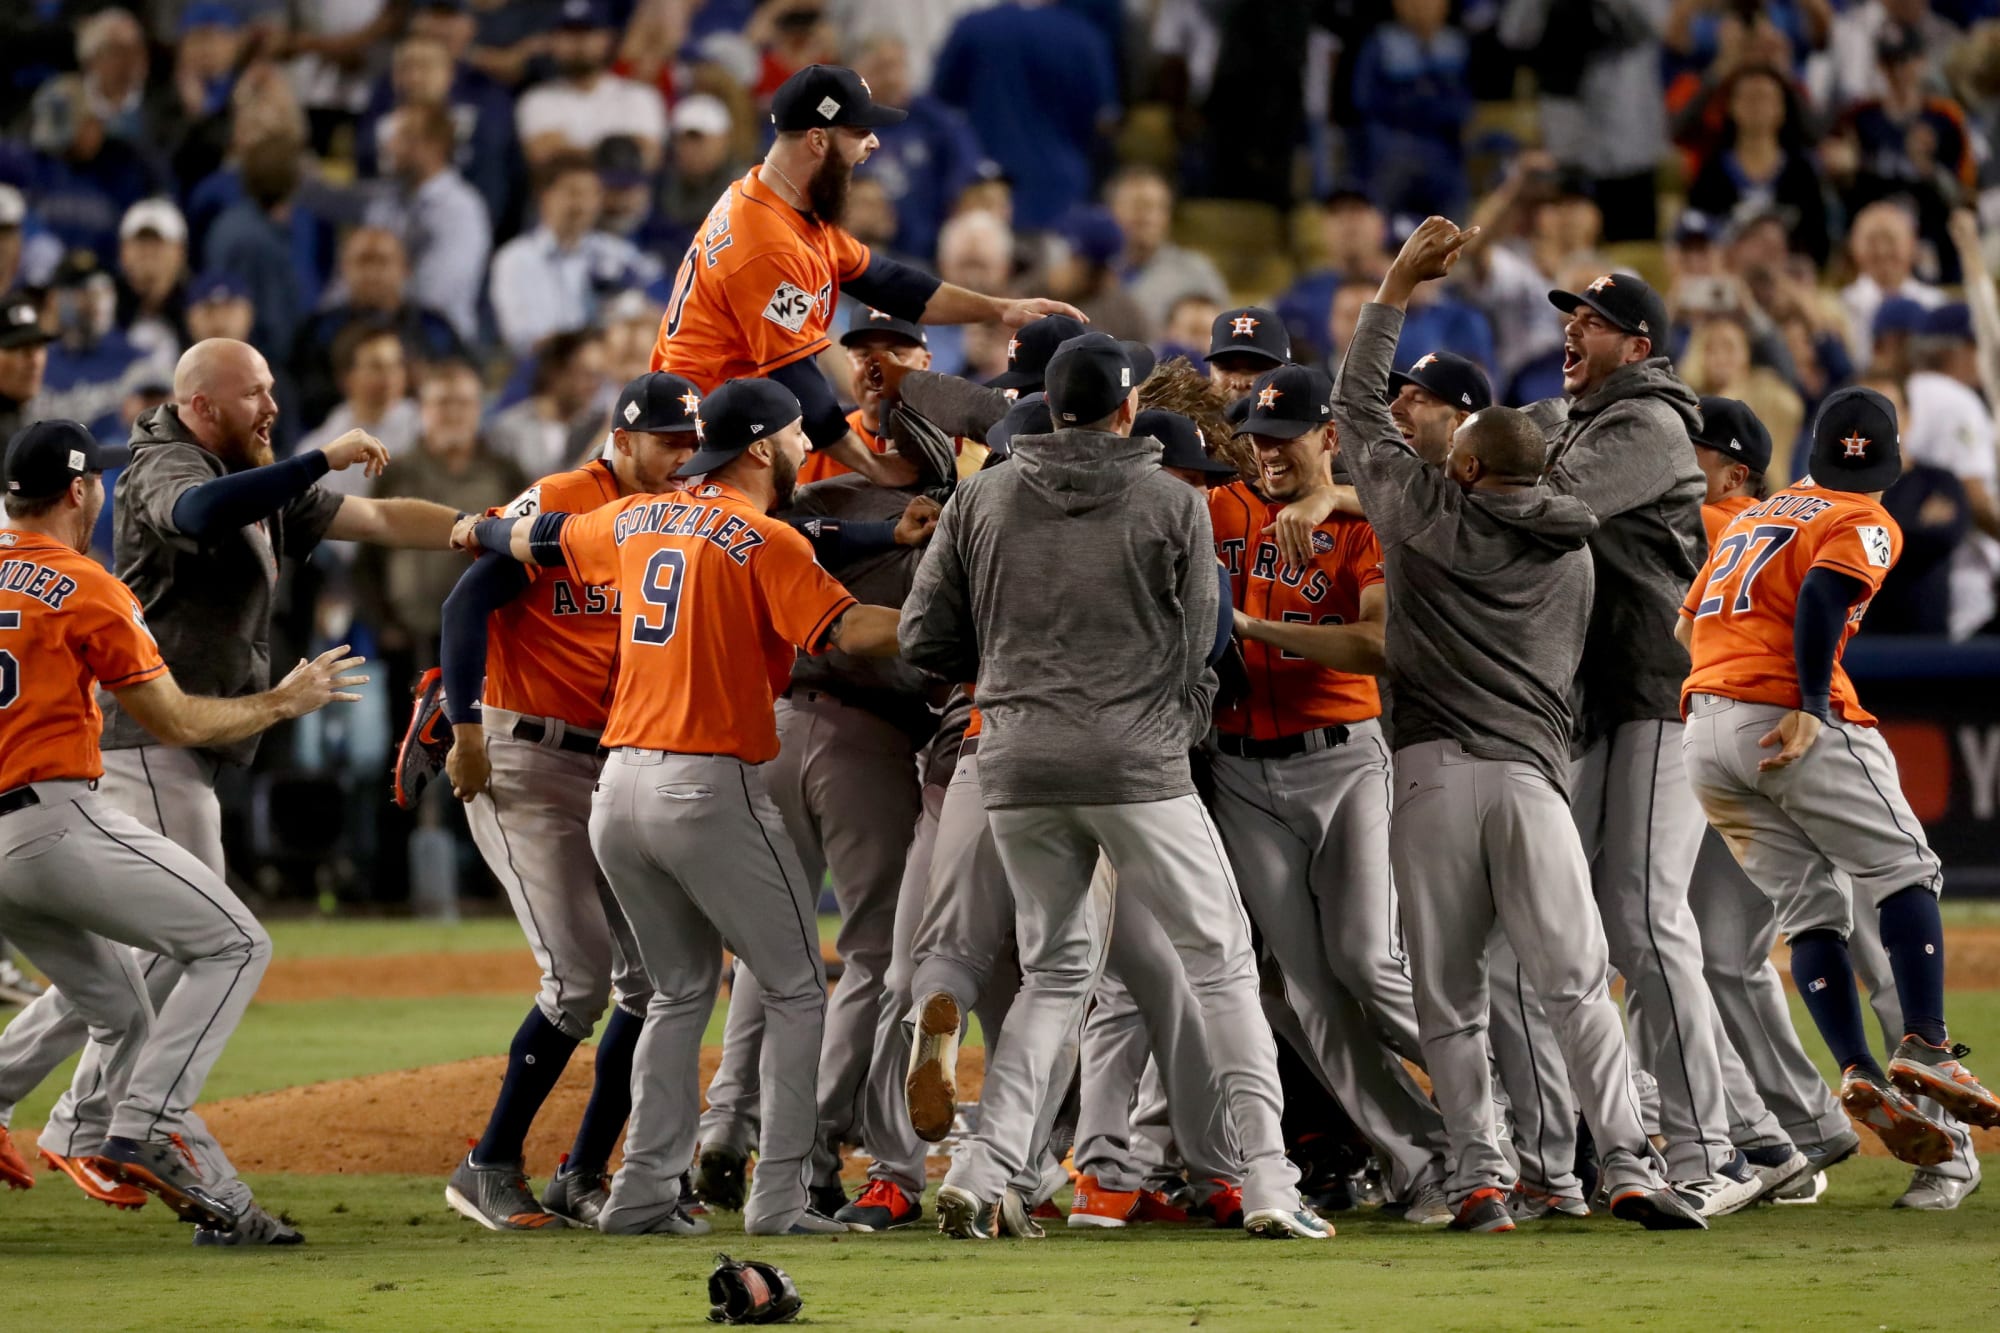 Astros/Dodgers rematch could be World Series preview